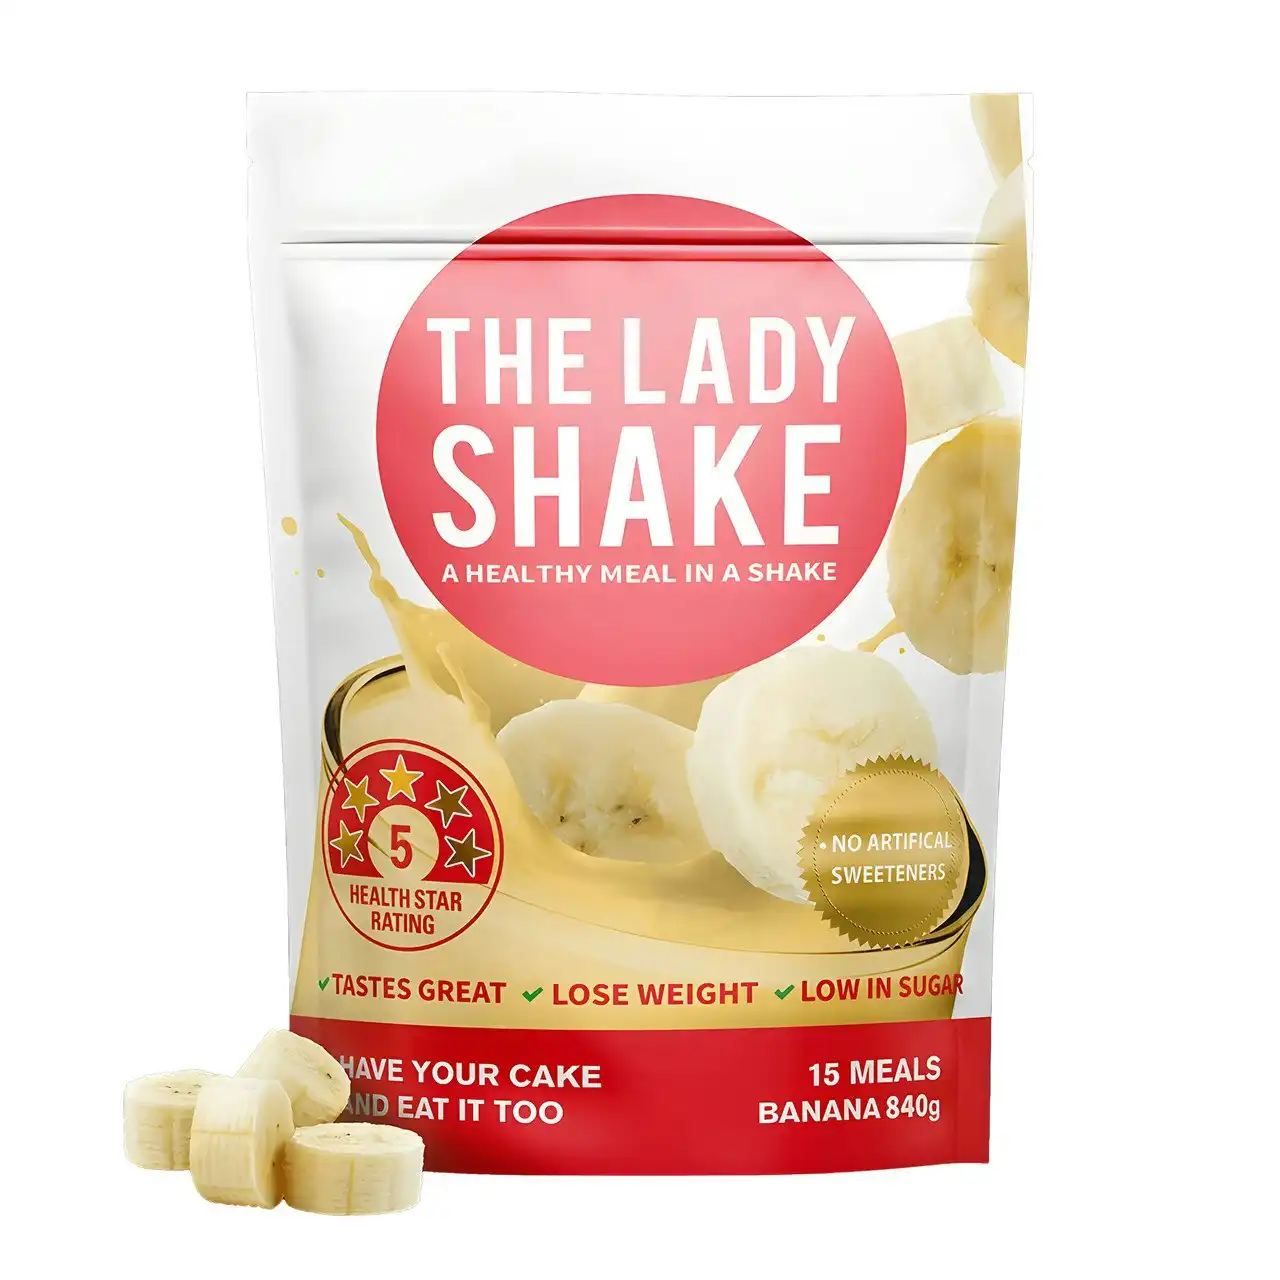 The Lady Shake Meal Replacement Banana 840g